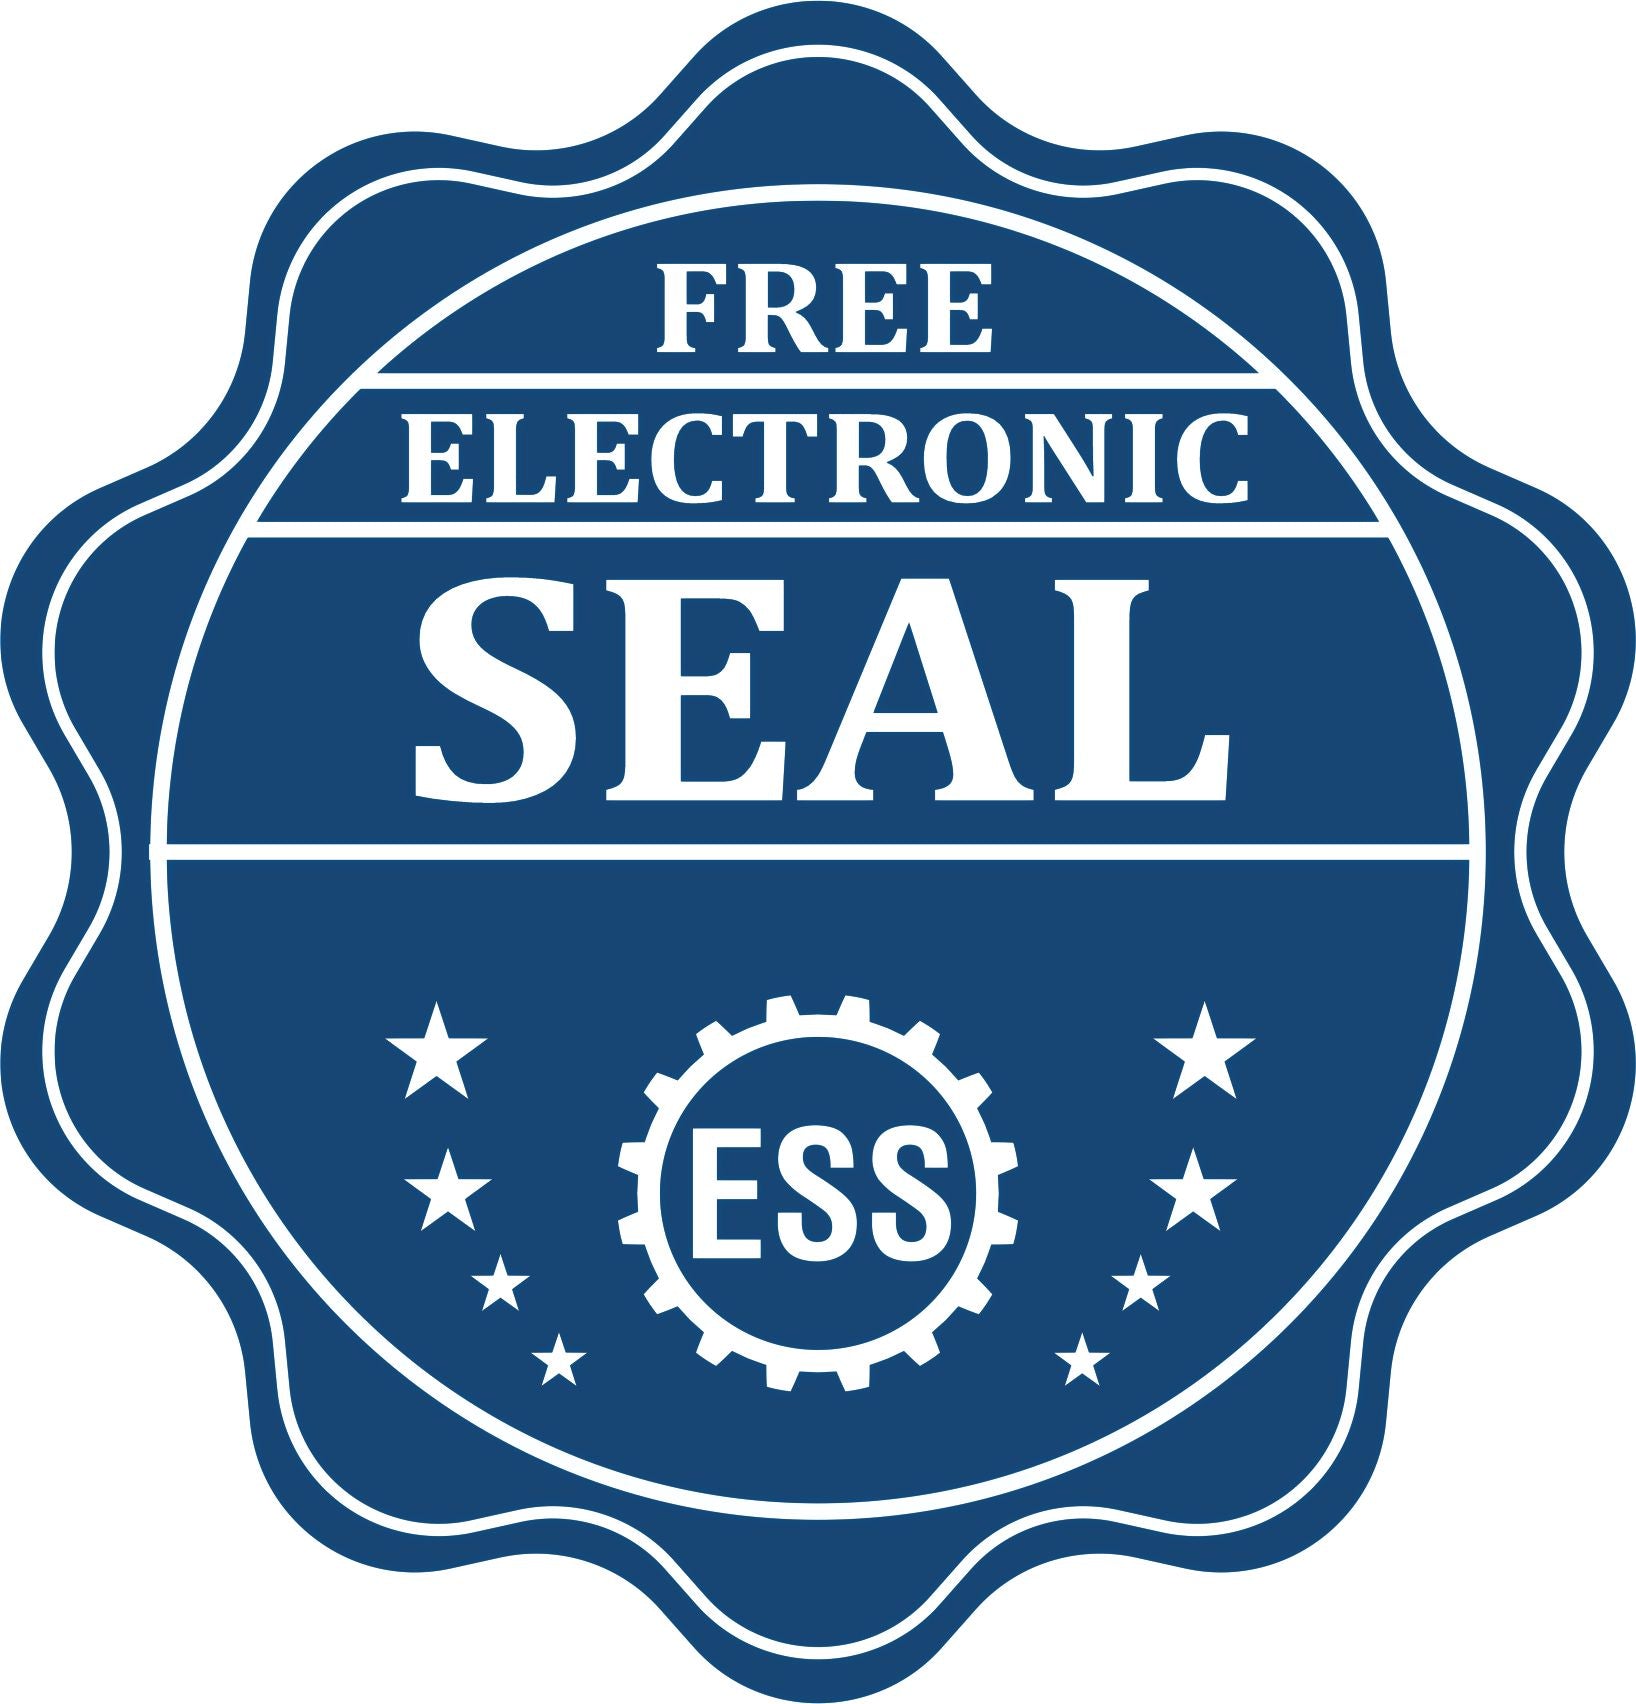 A badge showing a free electronic seal for the Gift Oklahoma Landscape Architect Seal with stars and the ESS gear on the emblem.